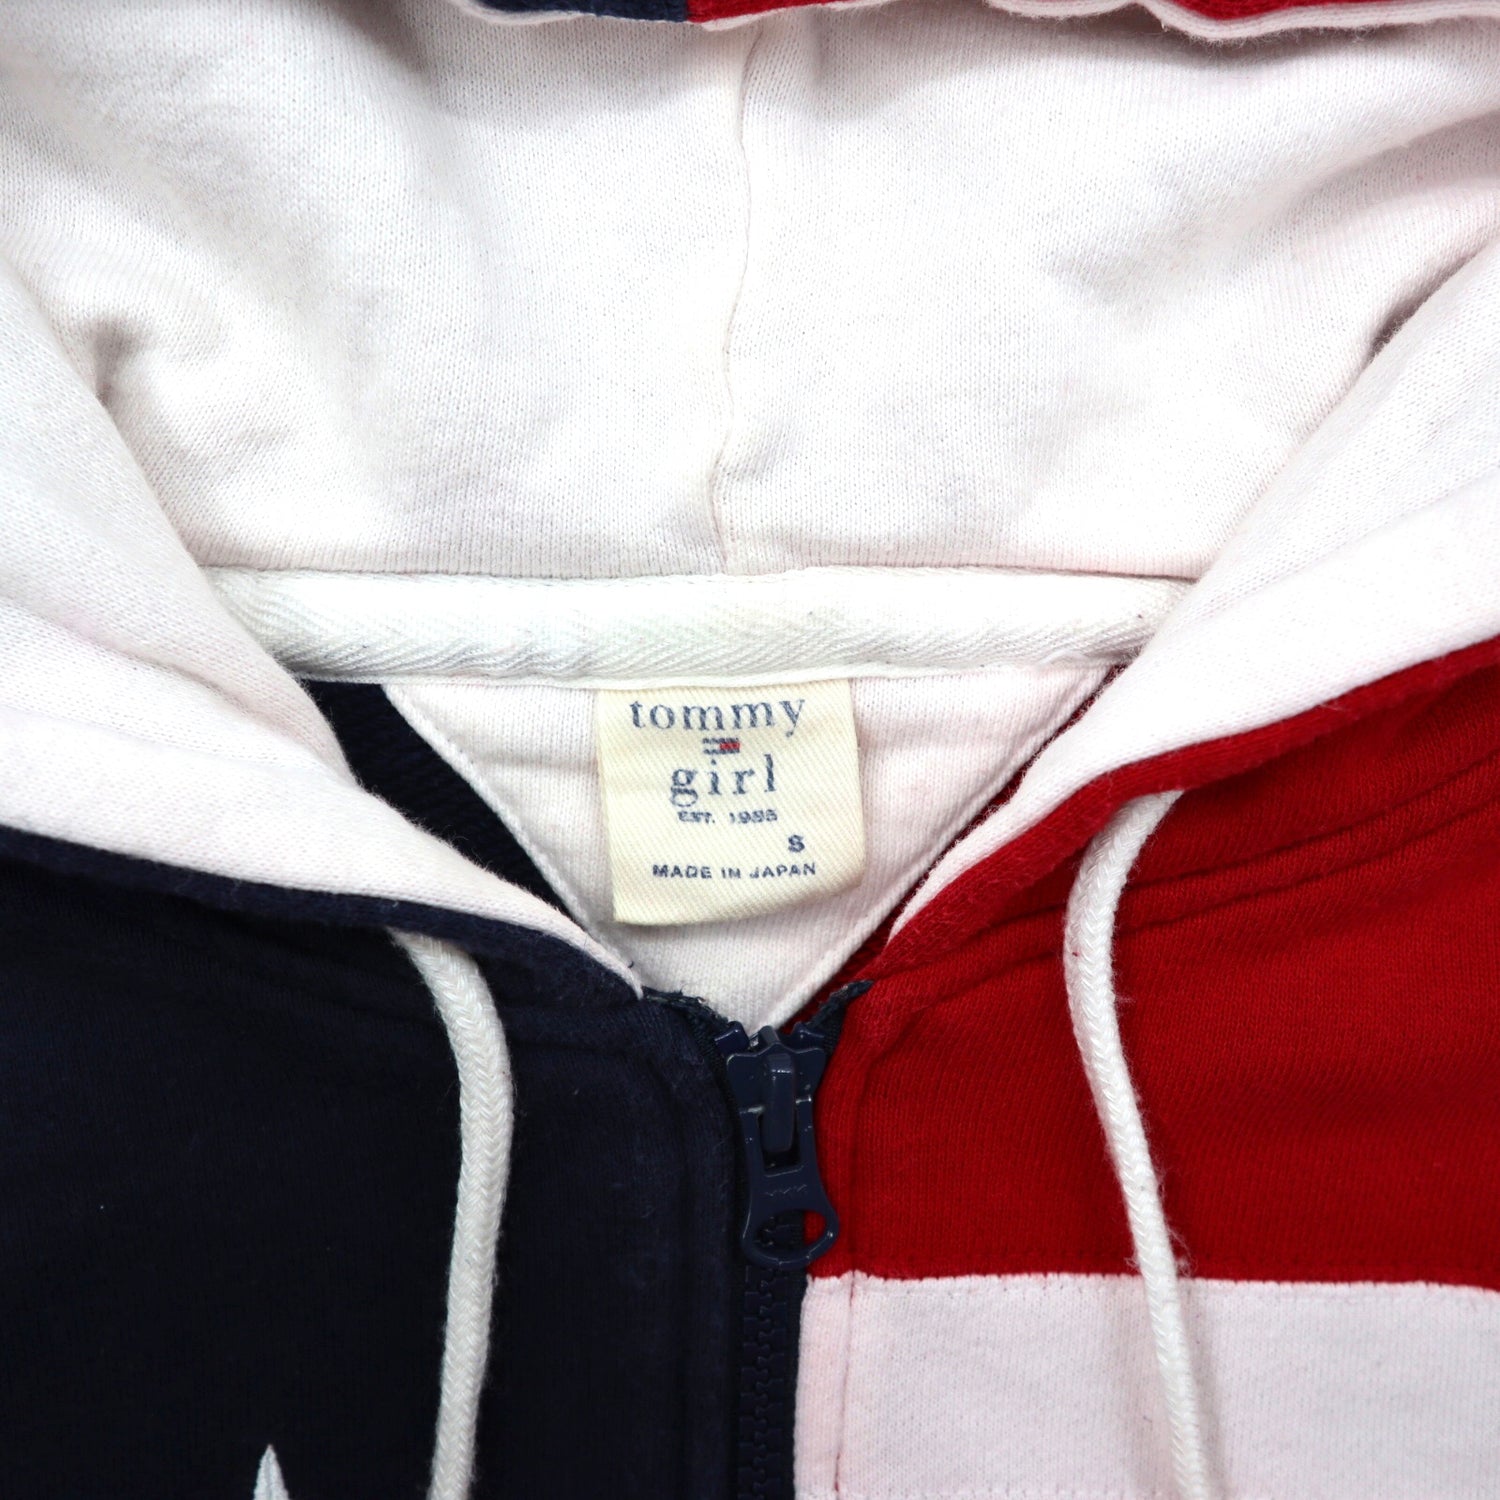 TOMMY GIRL ZIP UP HOODIE S Navy Red Cotton Star Striped Logo Logo ...